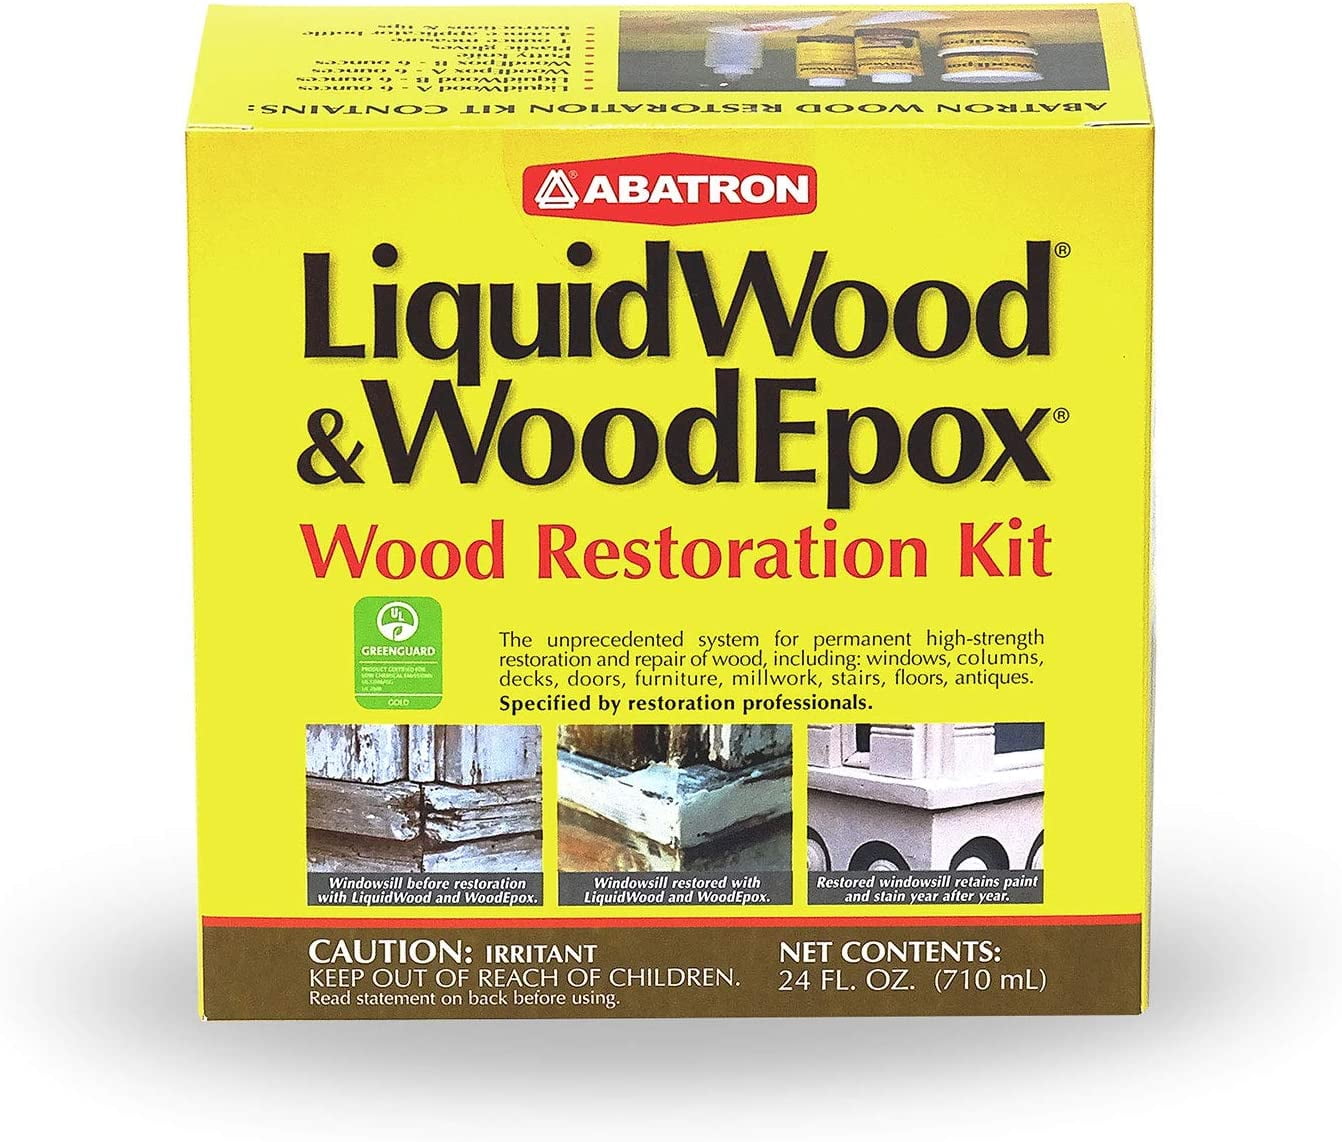  Abatron LiquidWood Kit - 12 Ounce - 2-Part Structural Wood  Epoxy Resin - Wood Hardener and Consolidant - Perfect Primer for WoodEpox Epoxy  Wood Filler : Health & Household